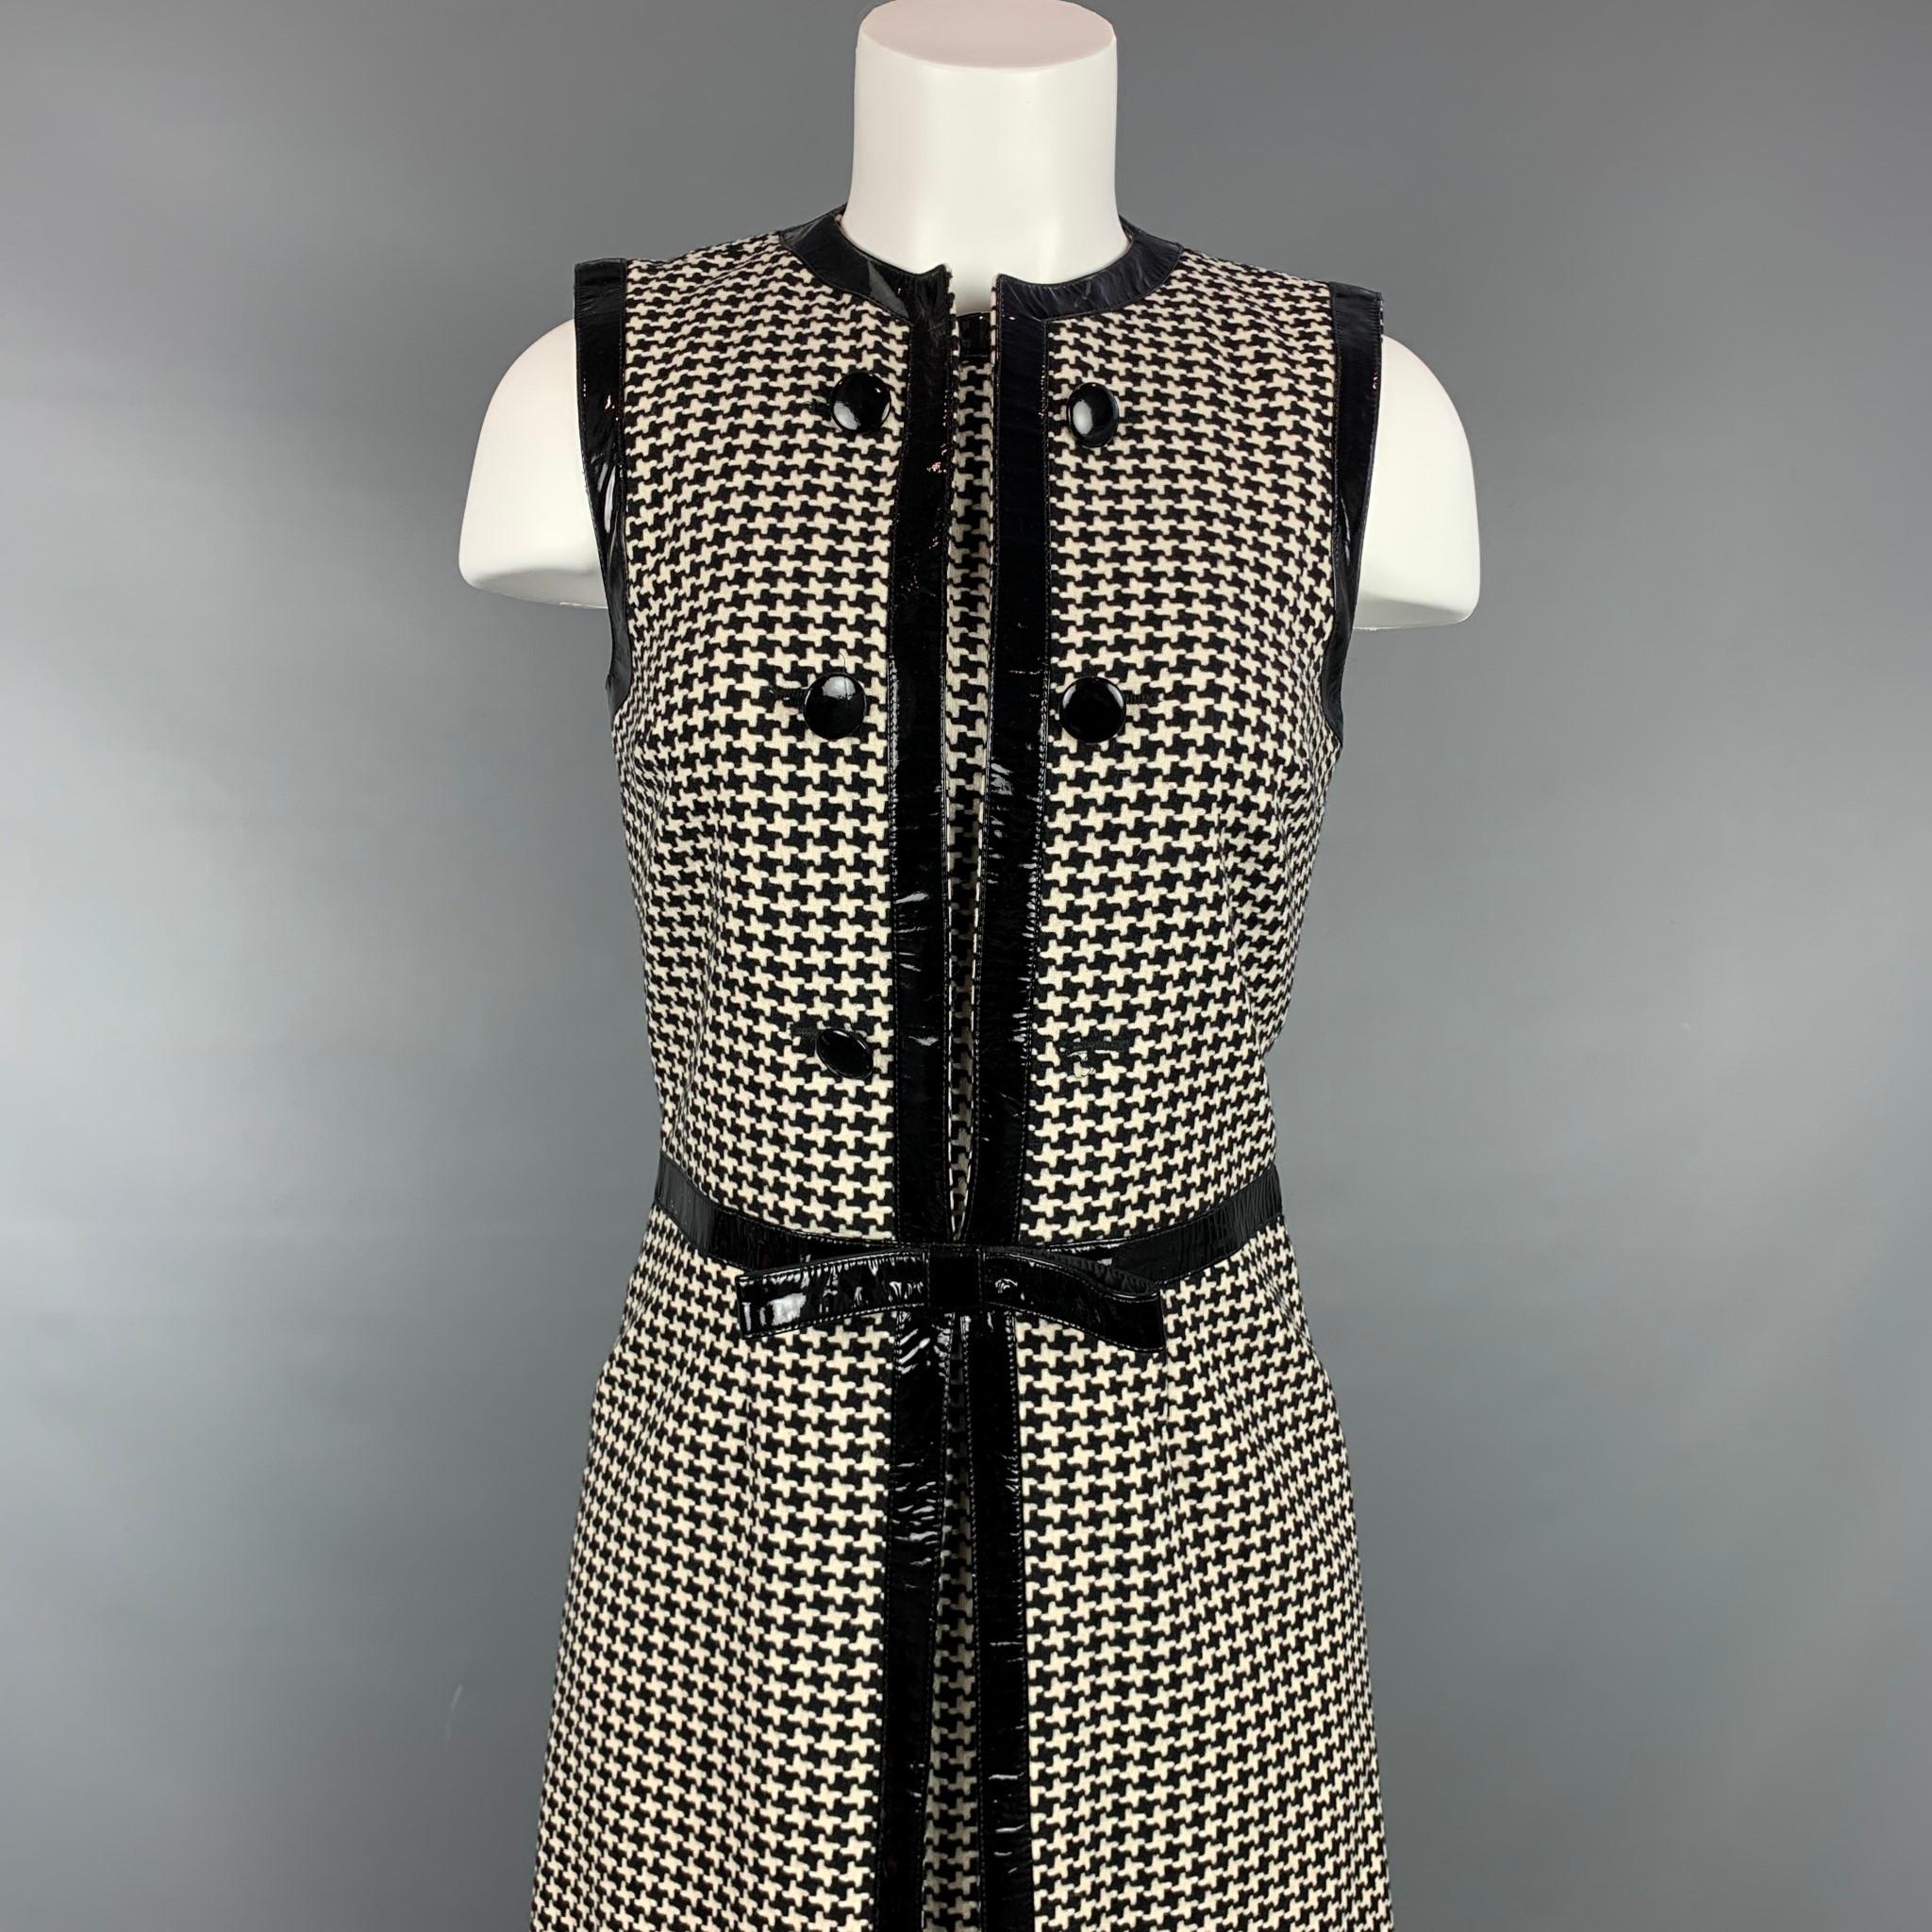 Vintage CHRISTIAN DIOR cocktail dress comes in a black & cream houndstooth wool / polyester with a slip liner featuring a bow detail, patent leather trim, collarless, front buttons, and a back zipper closure. Made in Italy.

Good Pre-Owned